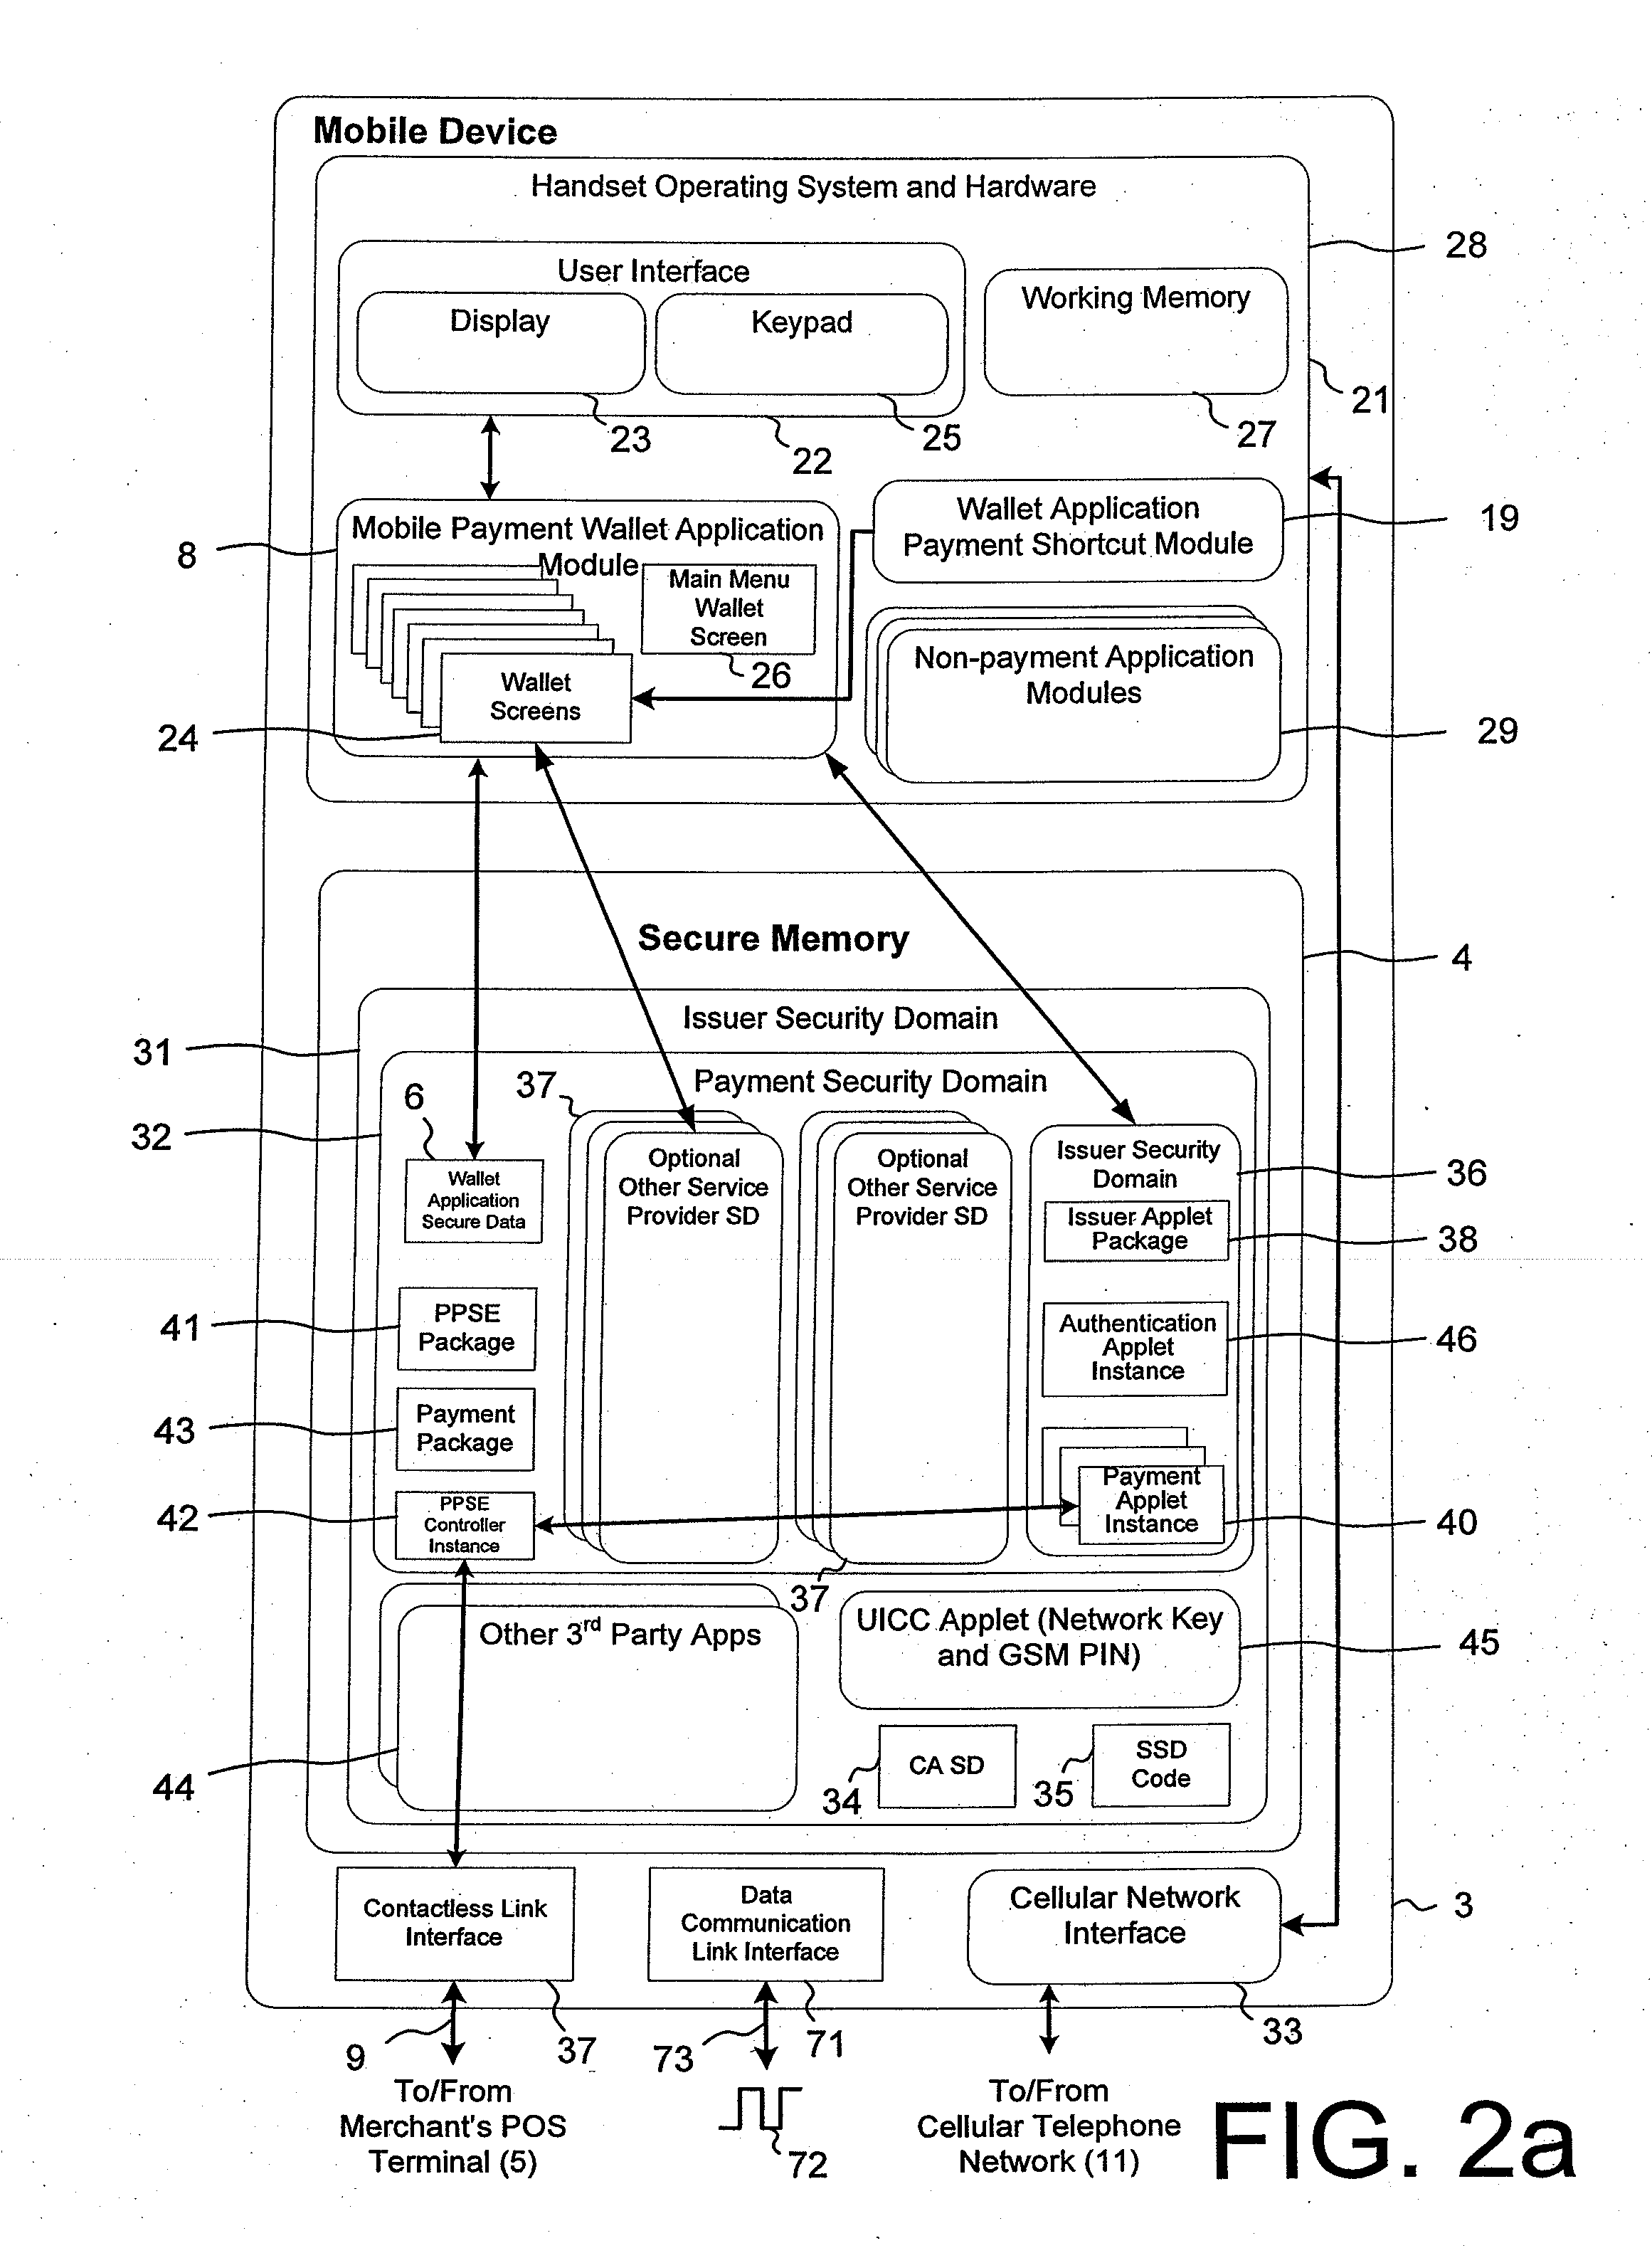 Method and System for Improved Electronic Wallet Access